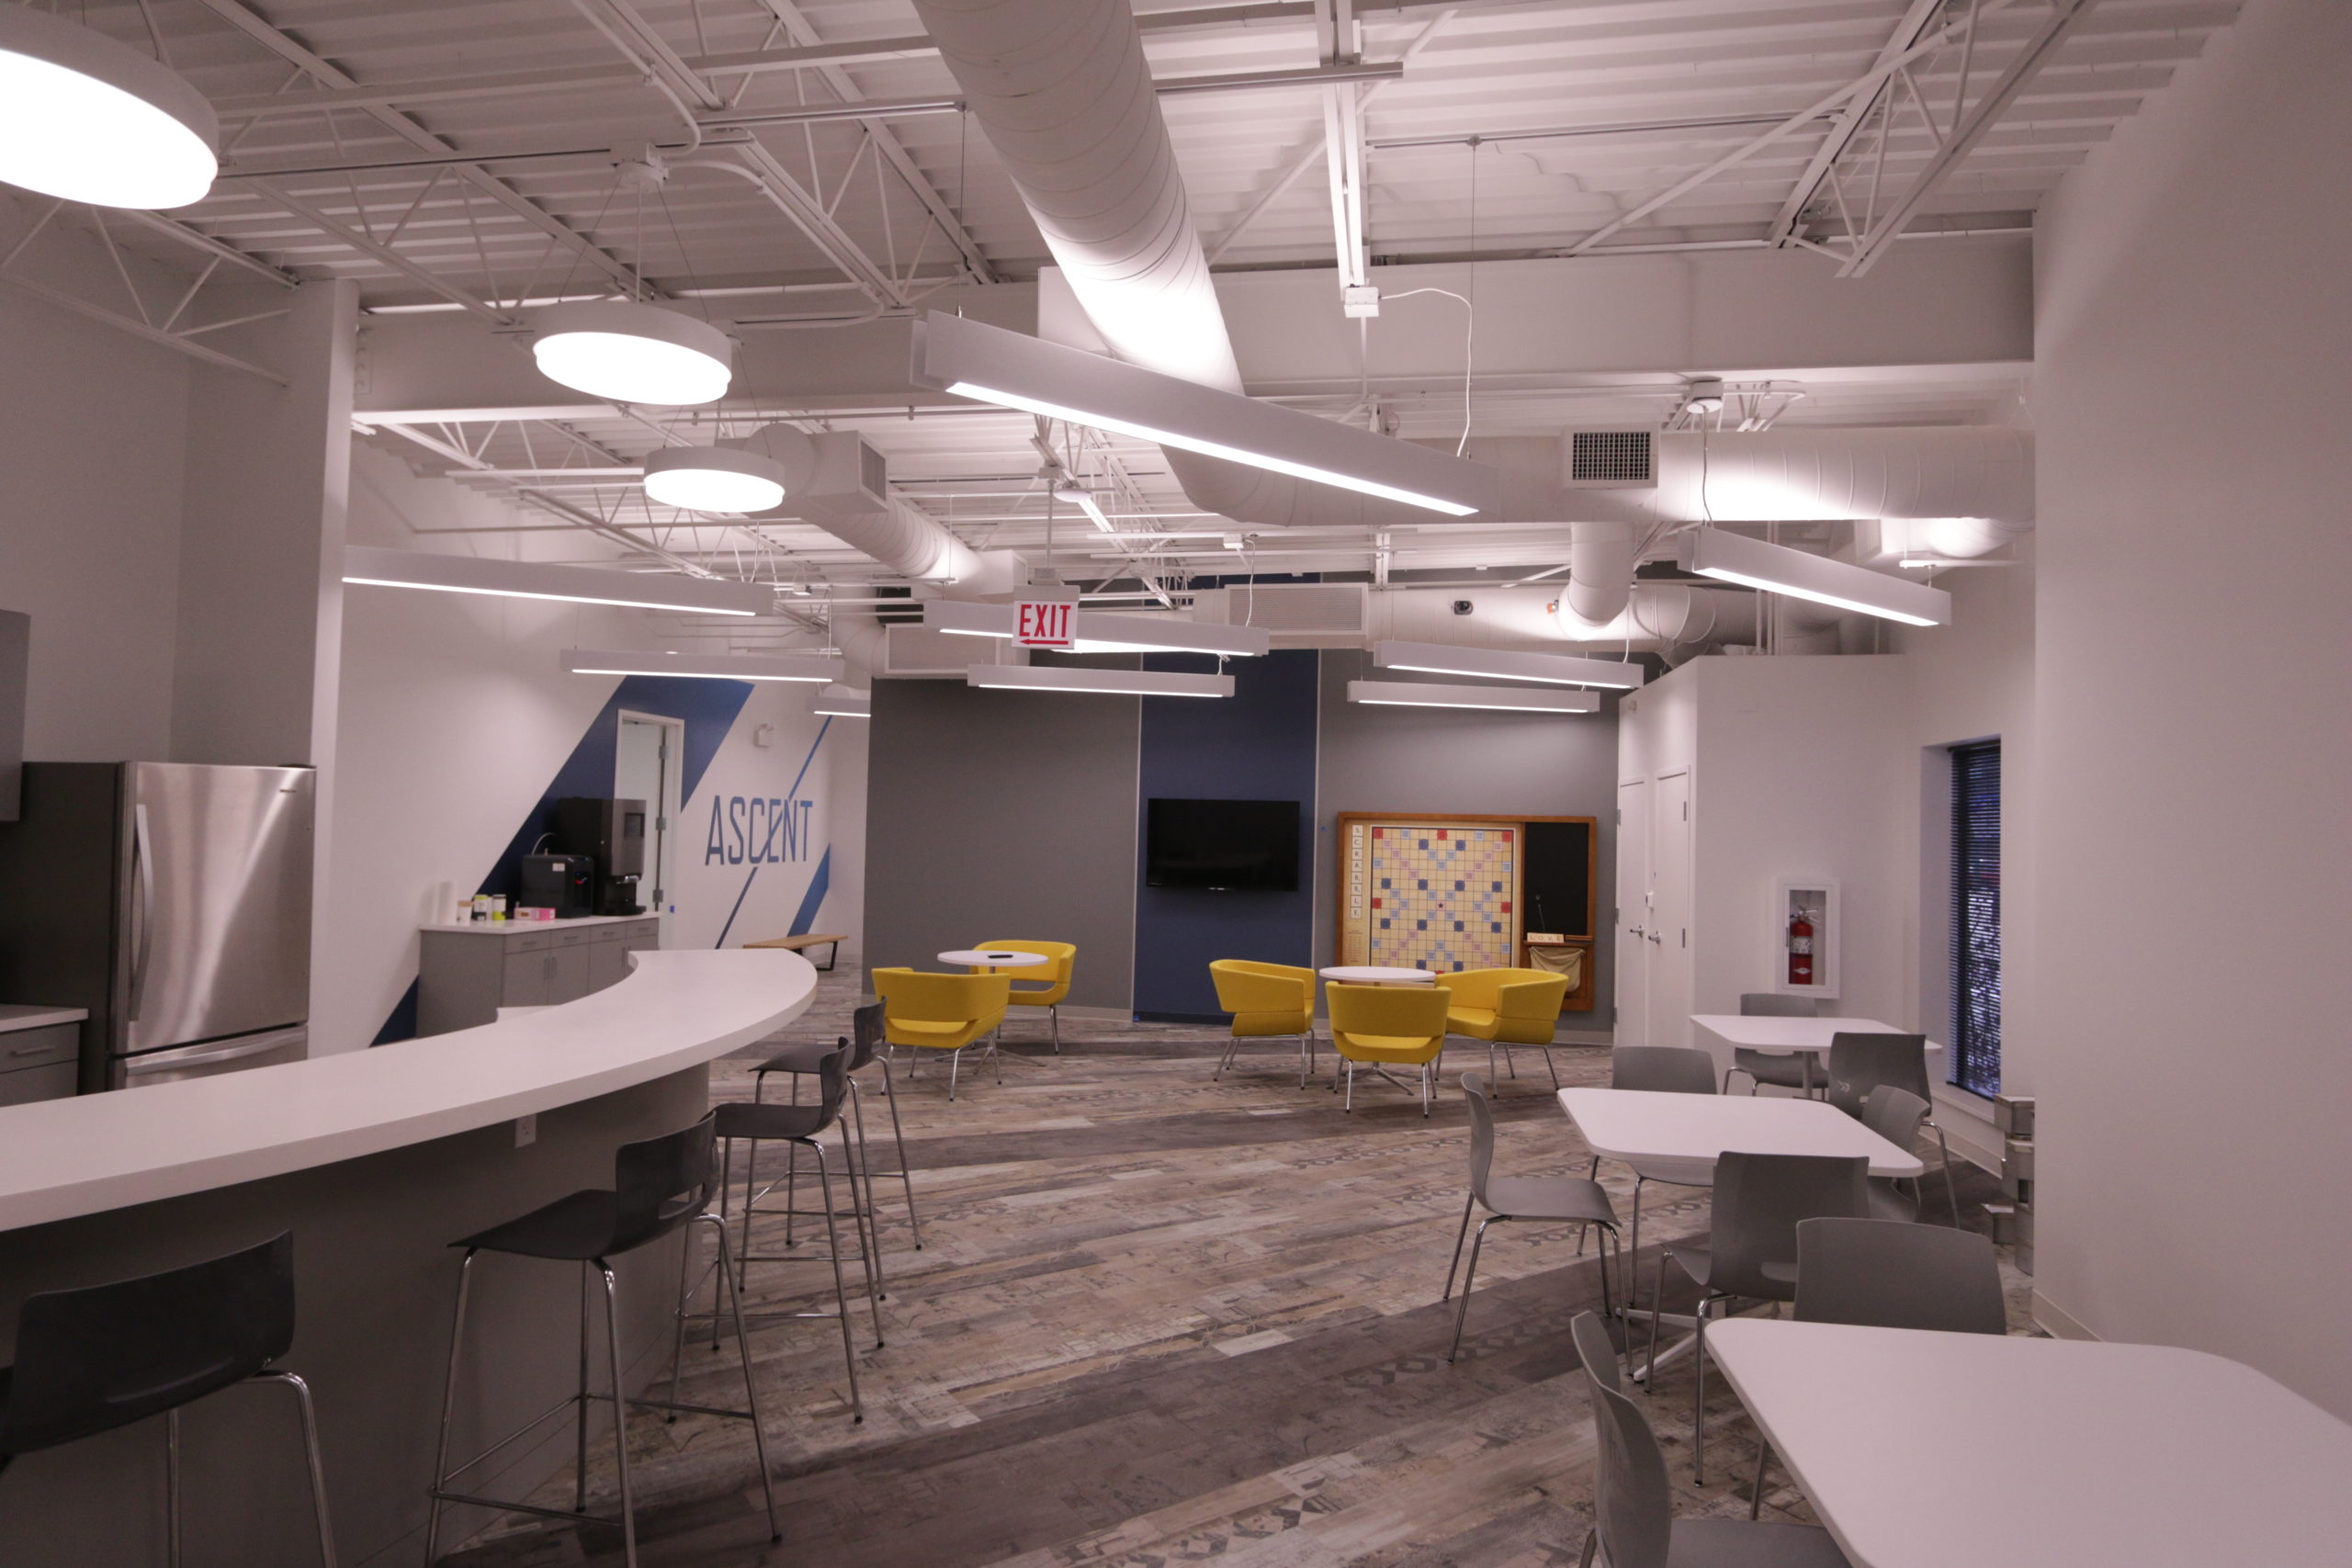 Spec suites and shared office program kicked off at Concourse Chicago